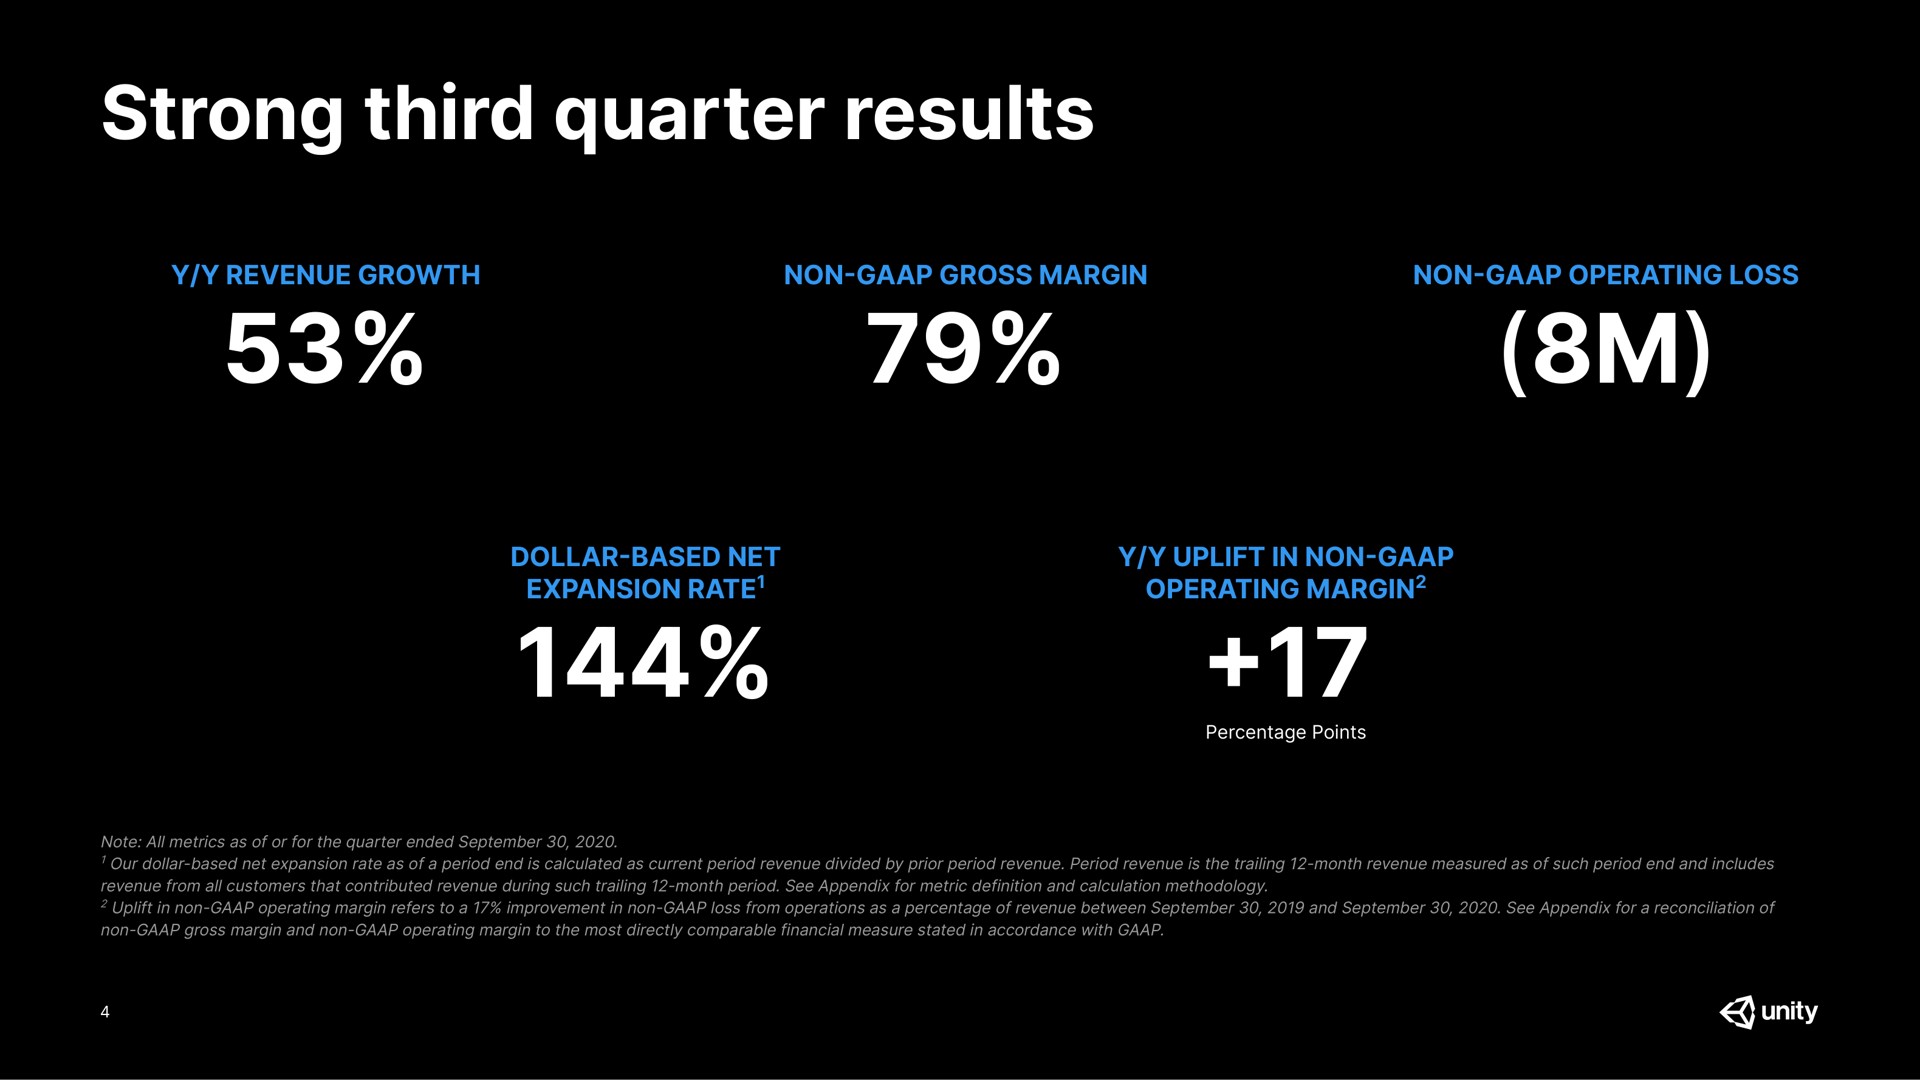 strong third quarter results strong results revenue growth non gross margin non operating loss dollar based net expansion rate uplift in non operating margin | Unity Software